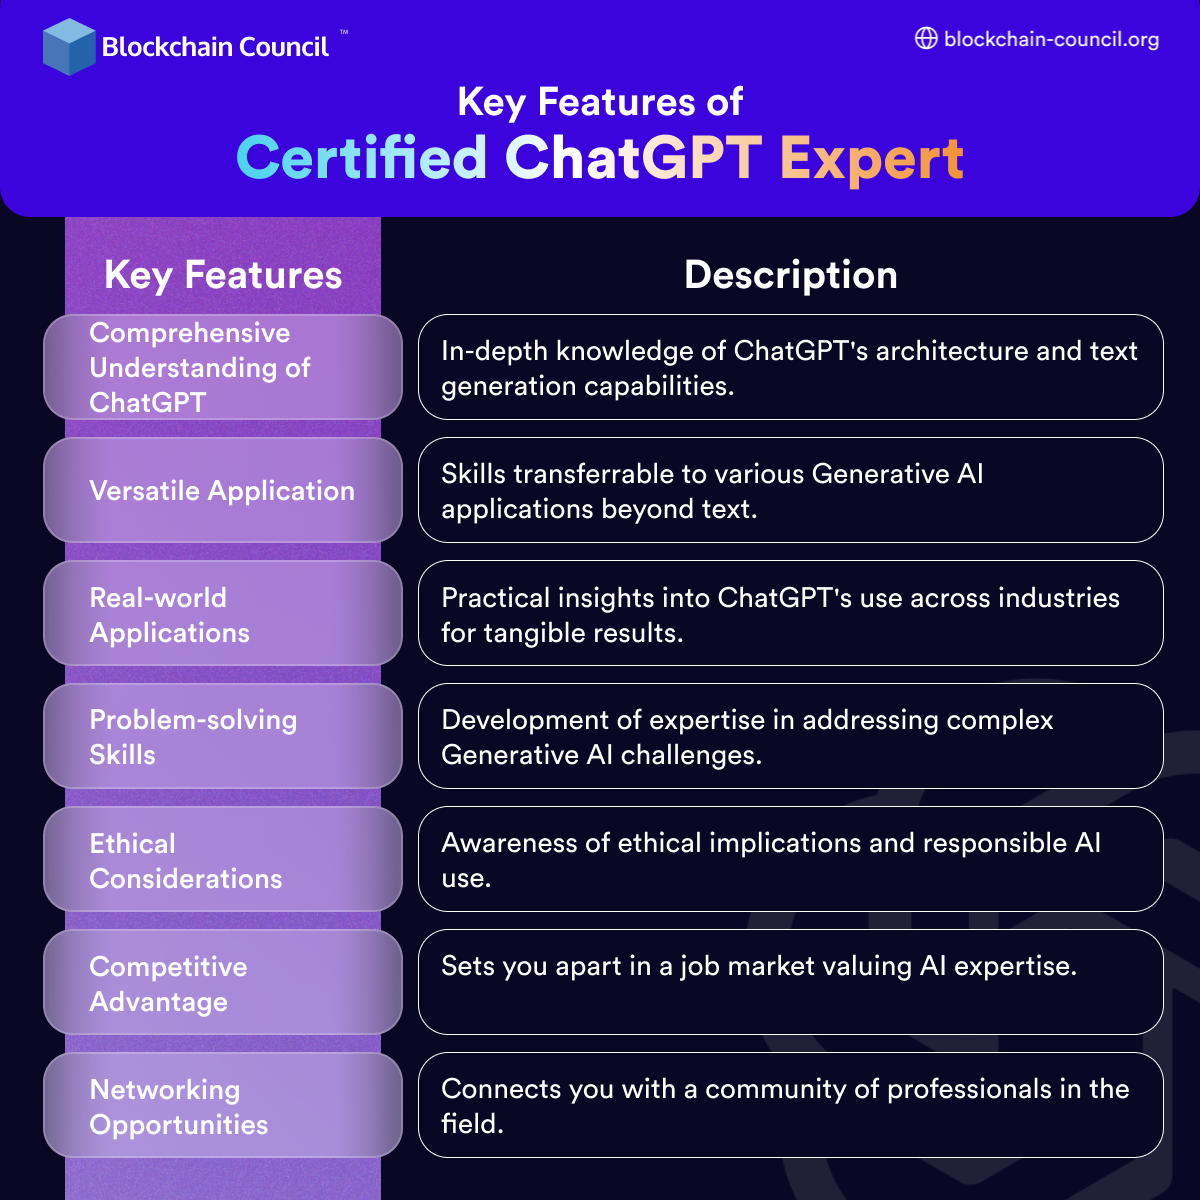 Key Features of Certified ChatGPT Expert (1)